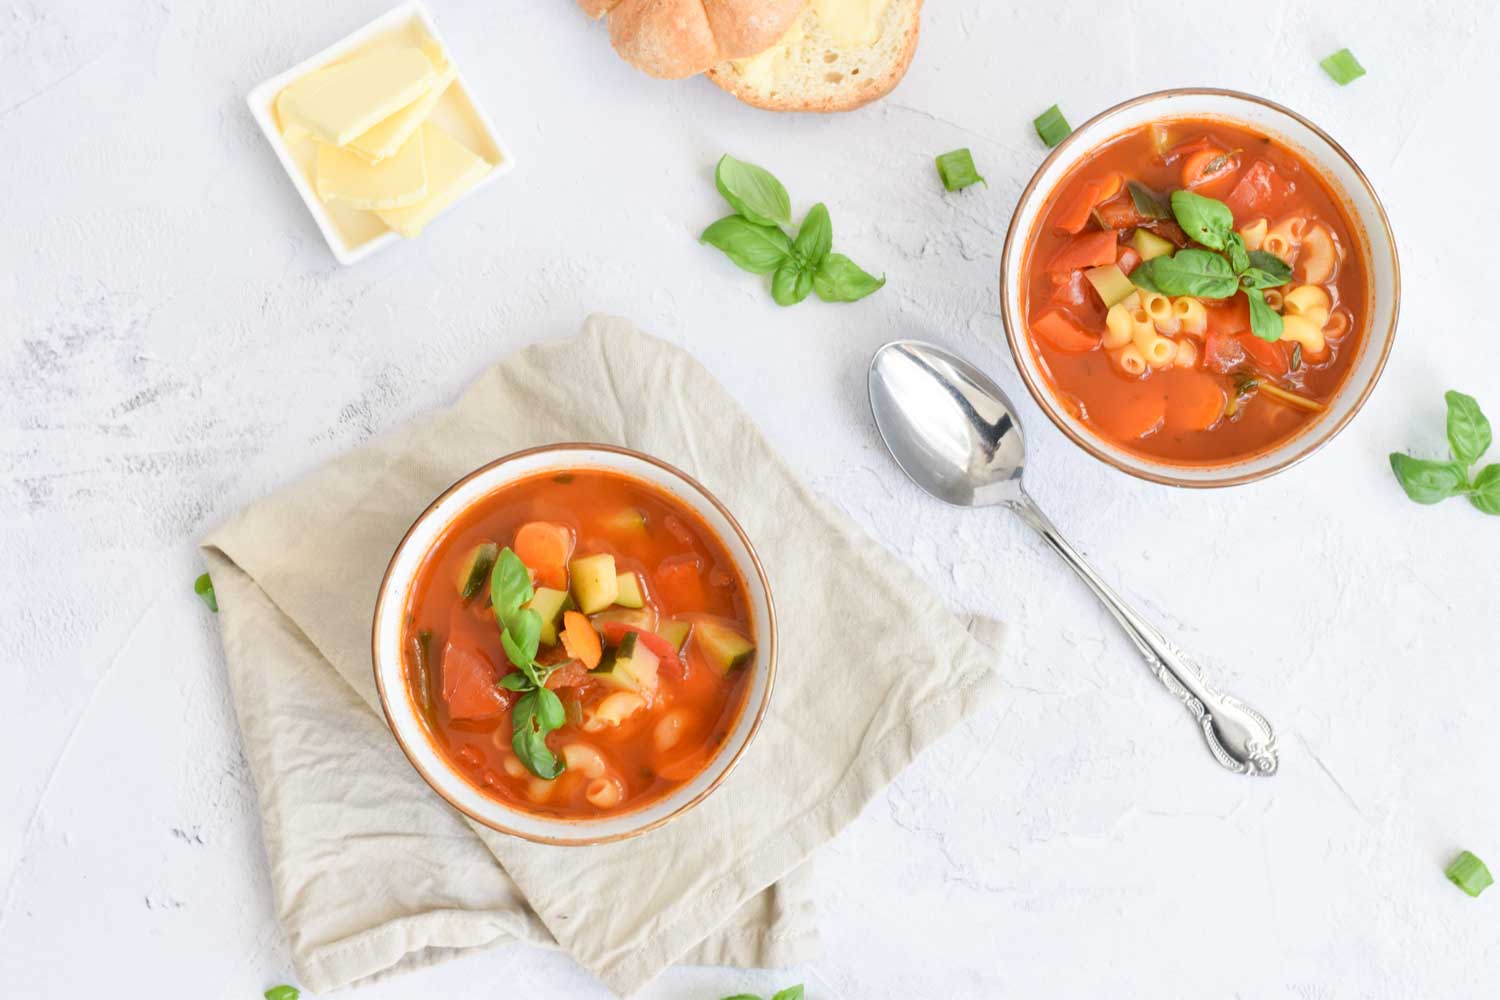 Two bowls of minestrone soup with a spoon in between and some bread and butter on the side